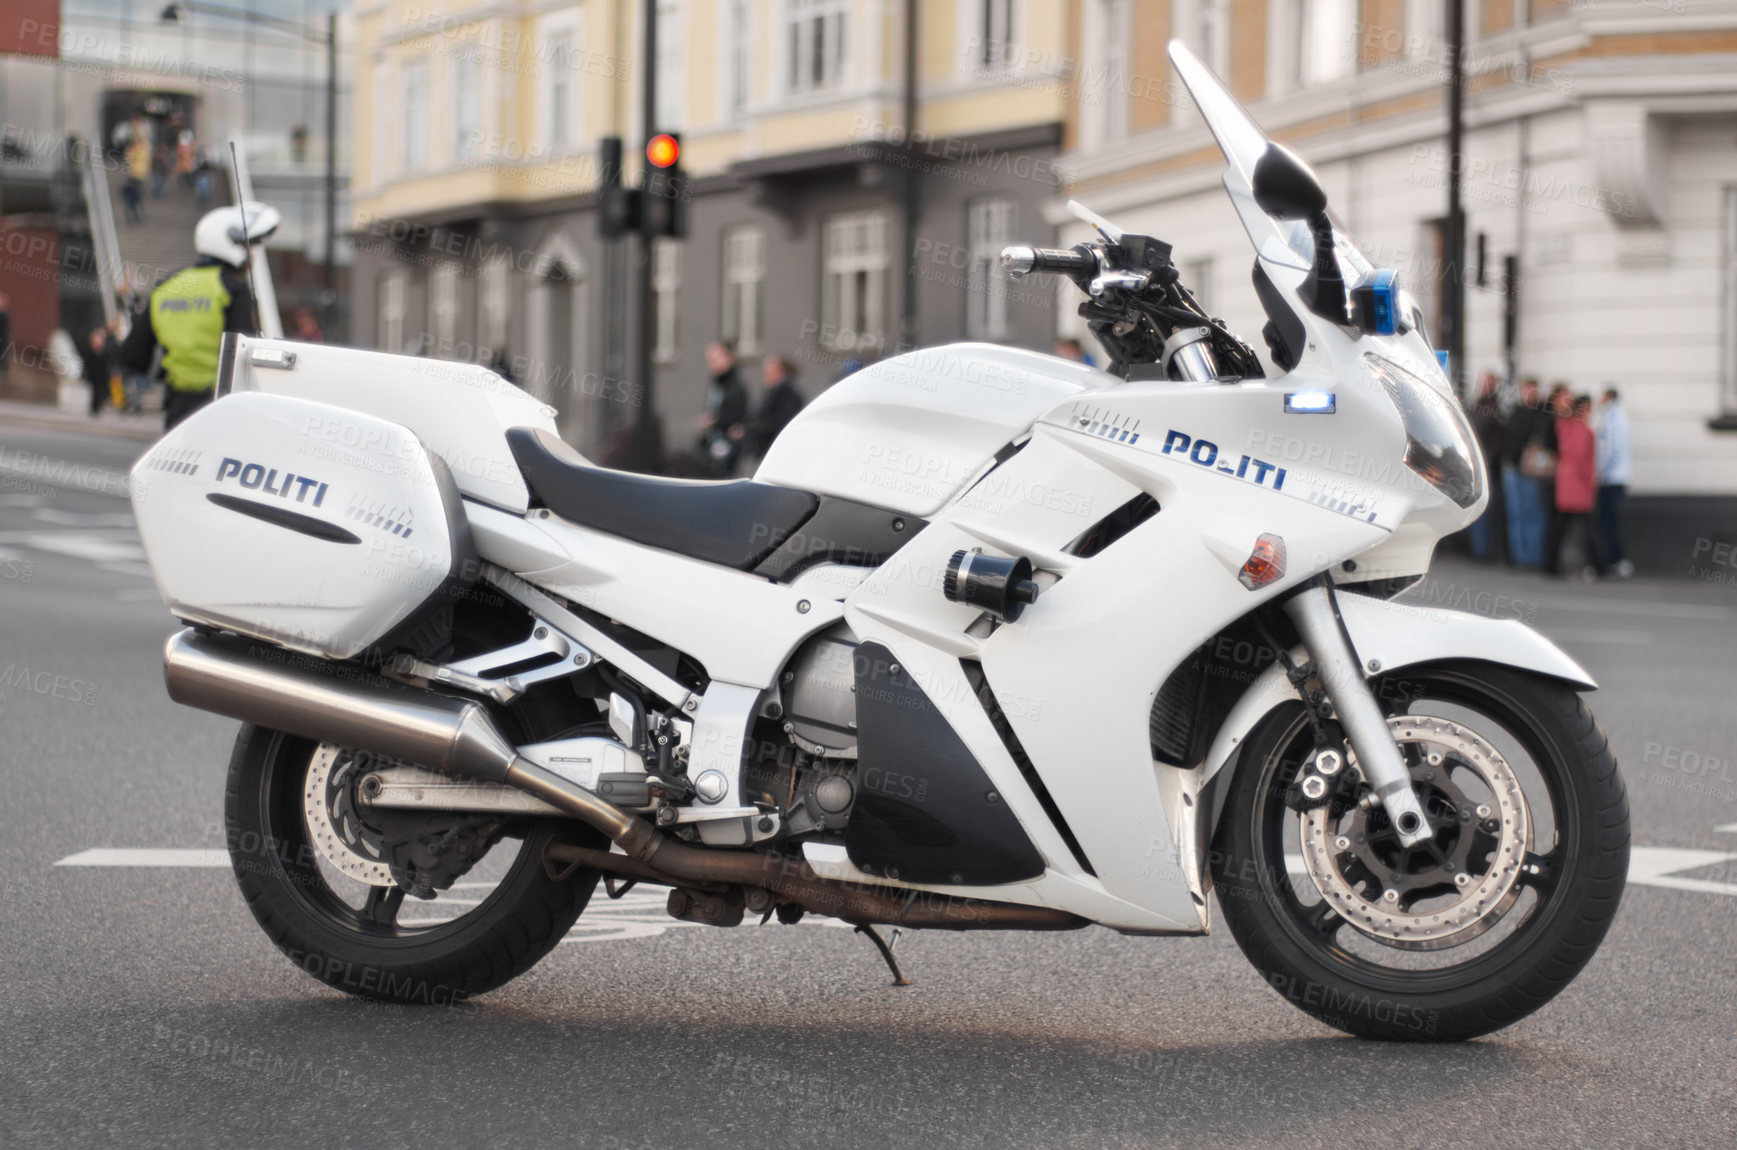 Buy stock photo Police, motorcycle and transportation vehicle in city, safety and law enforcement on urban road, empty street and Norway. Security, motorbike and travel for public service, legal power and authority